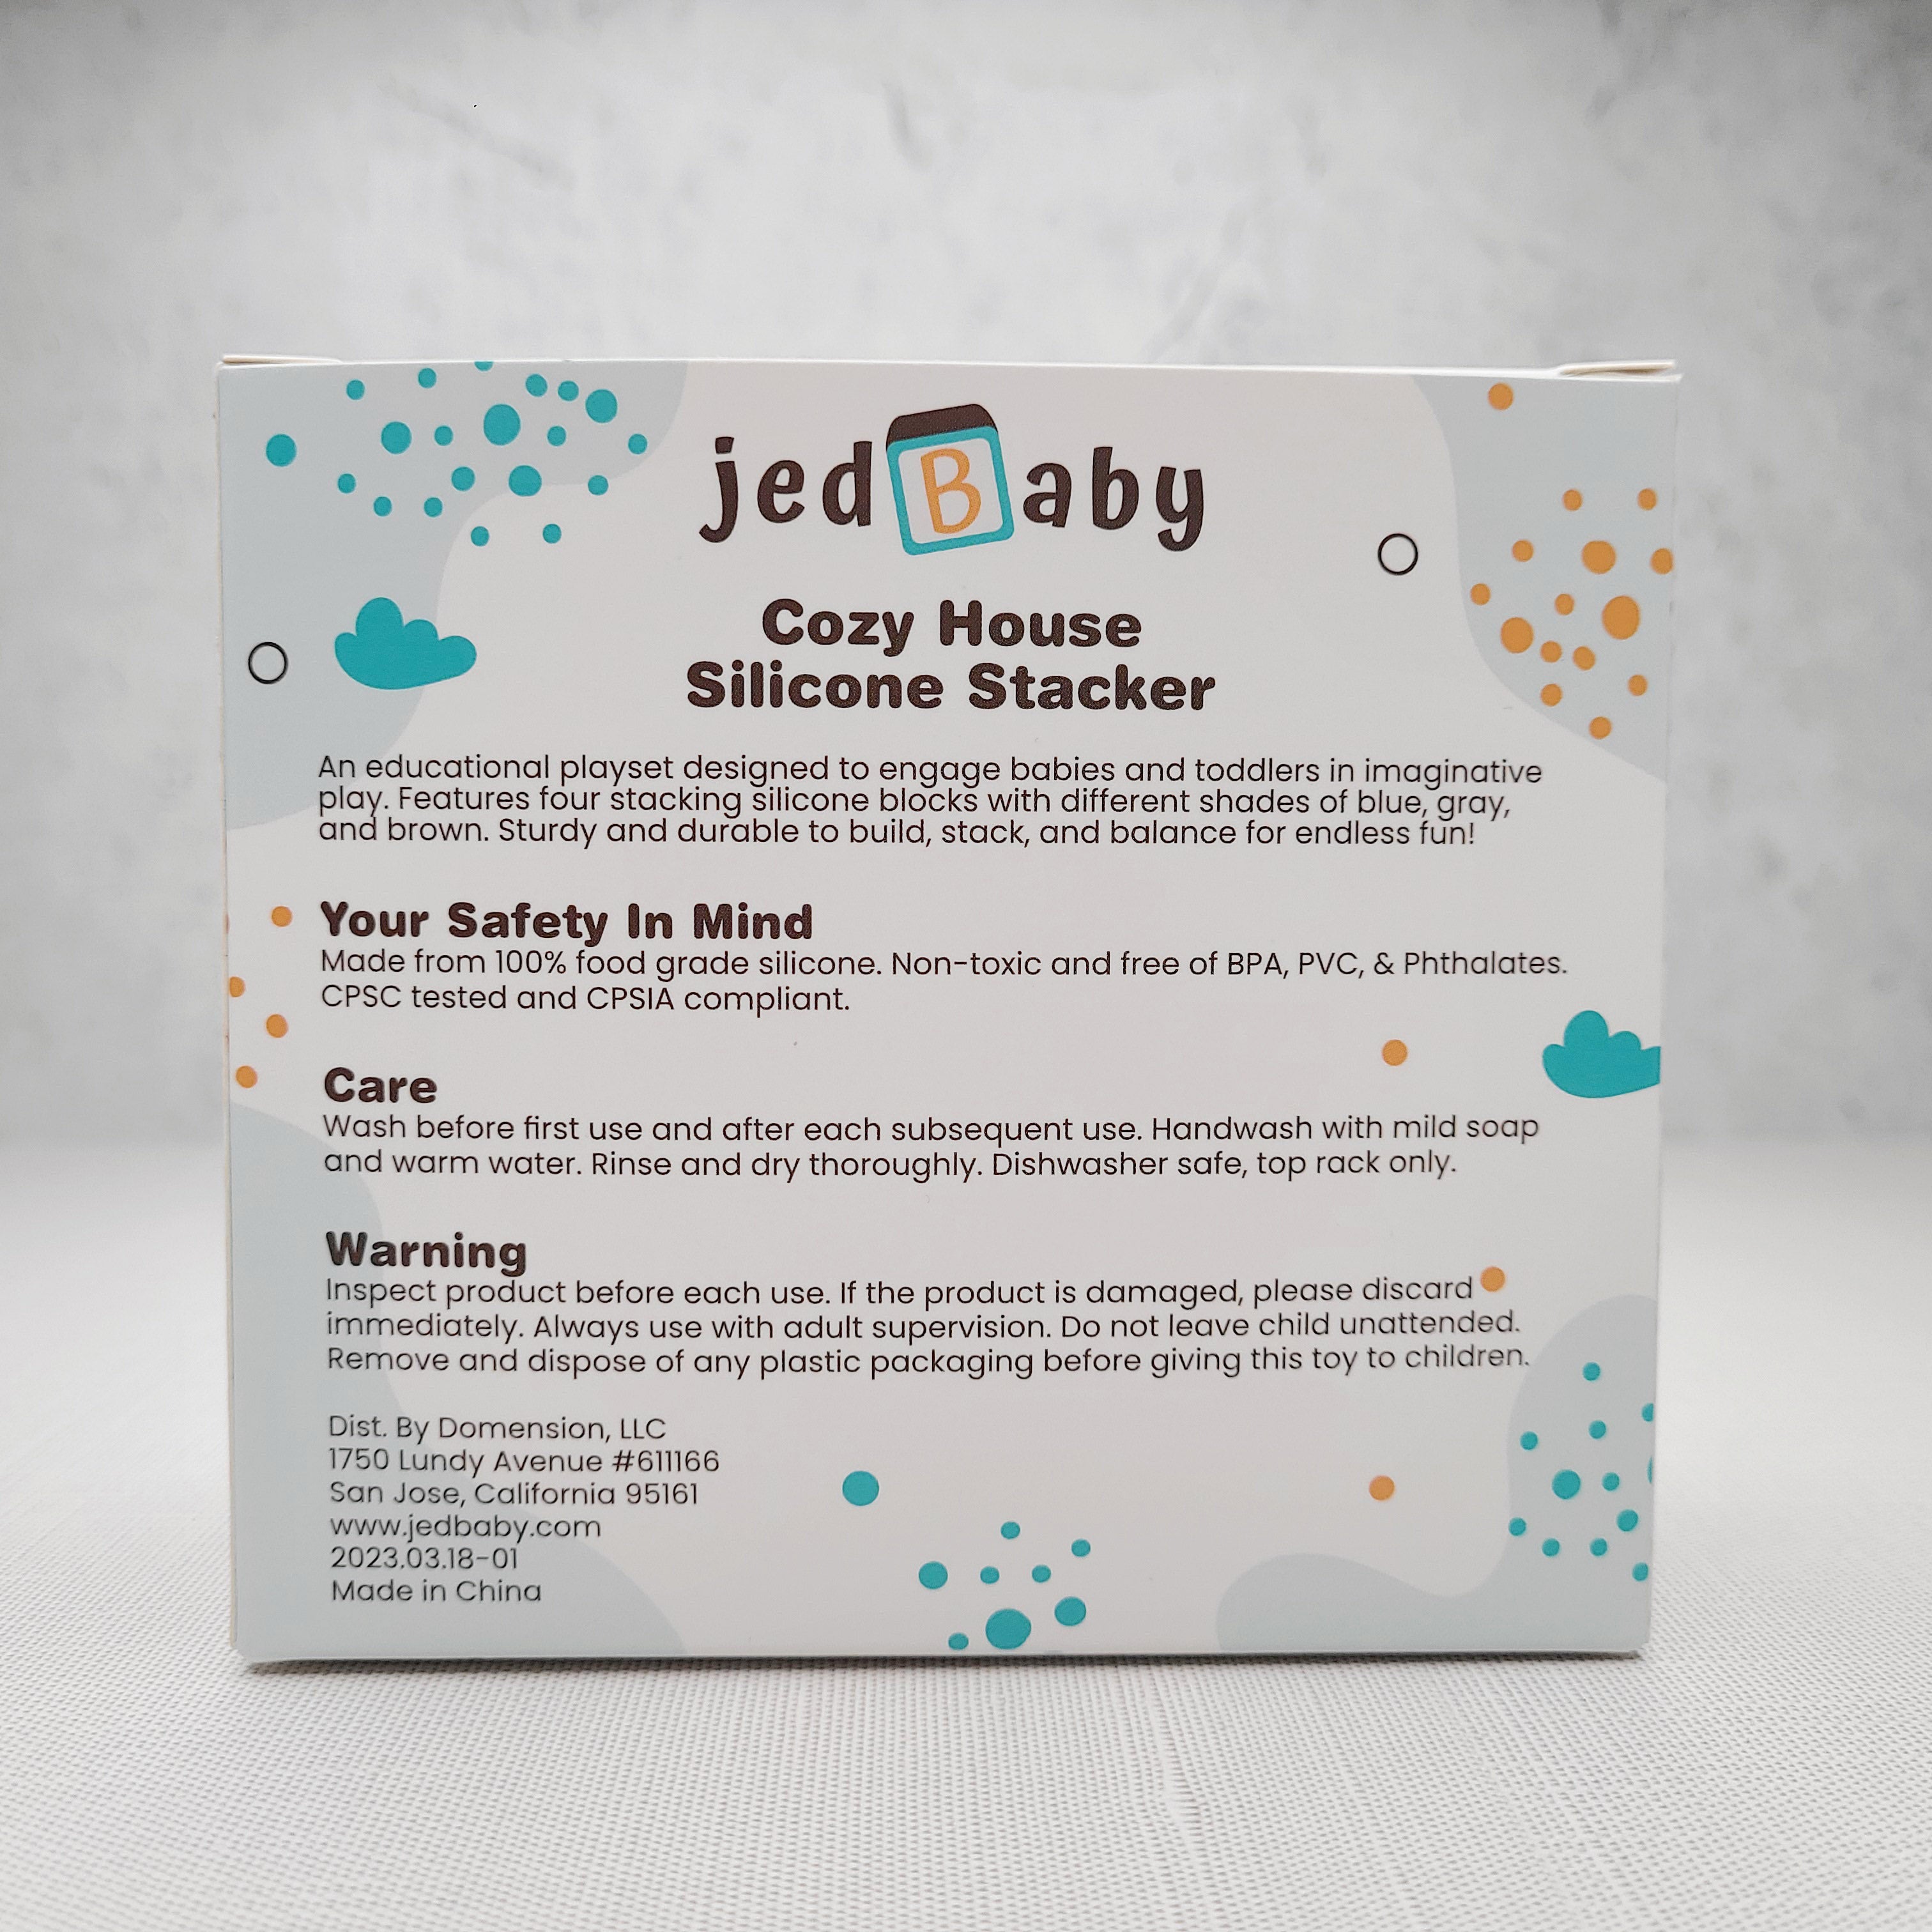 Jedbaby cosy house silicone stacker toy packaging